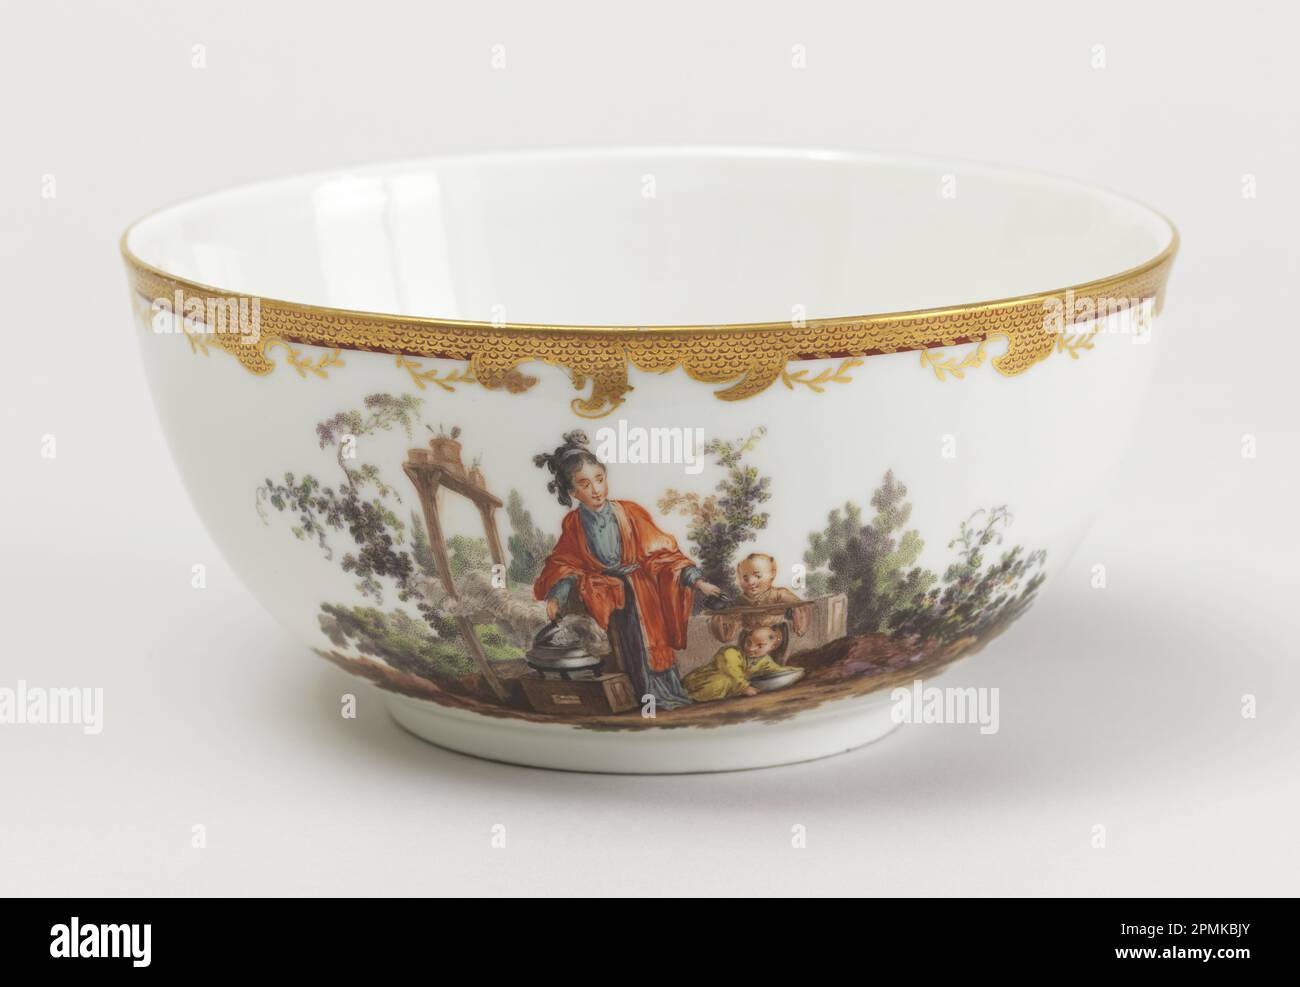 Slop Bowl with Chinoiserie Vignettes Bowl; Manufactured by Royal Porcelain Manufactory, Berlin (Germany); Style of Jacques-Gabriel Huquier (French, 1730 - 1805), François Boucher (French, 1703–1770); Germany; hard paste porcelain, vitreous enamel, gold Stock Photo